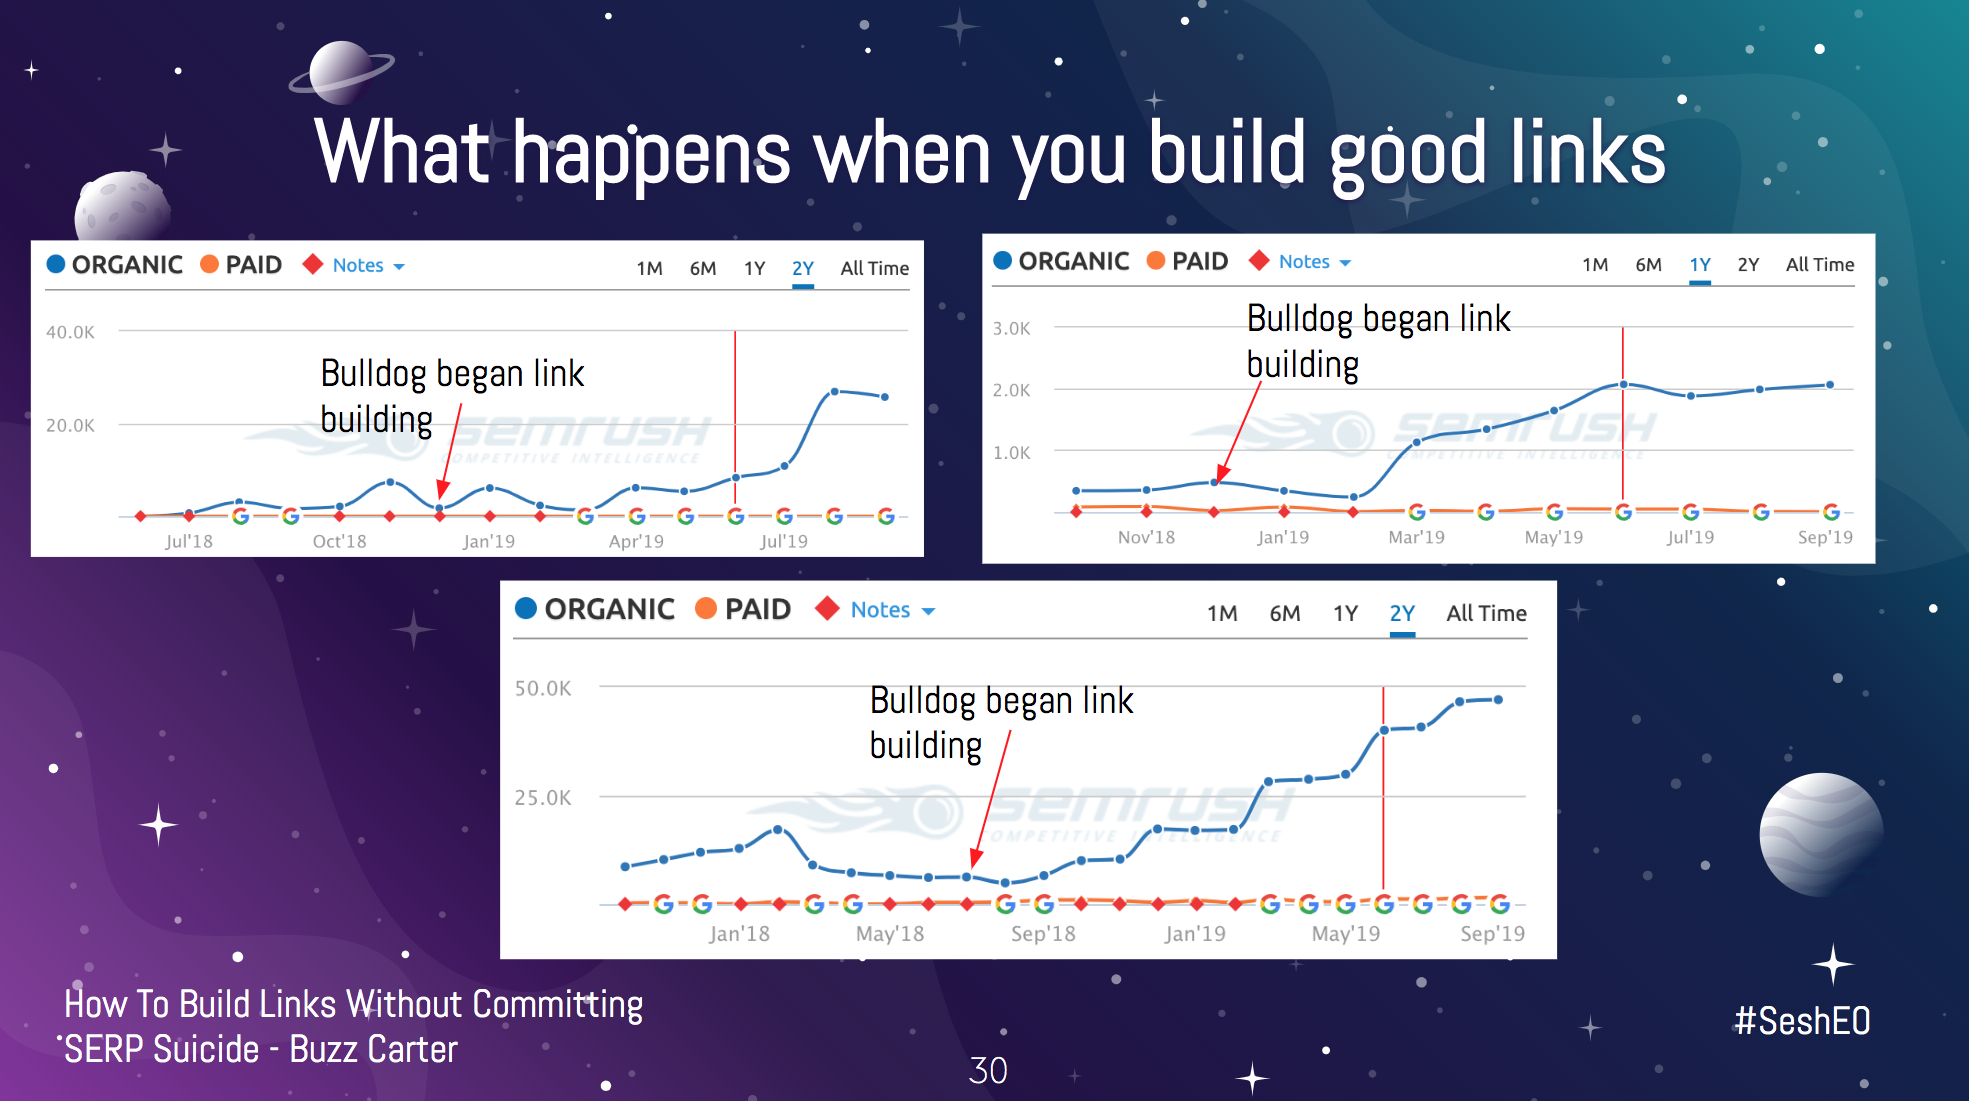 Results of good link building